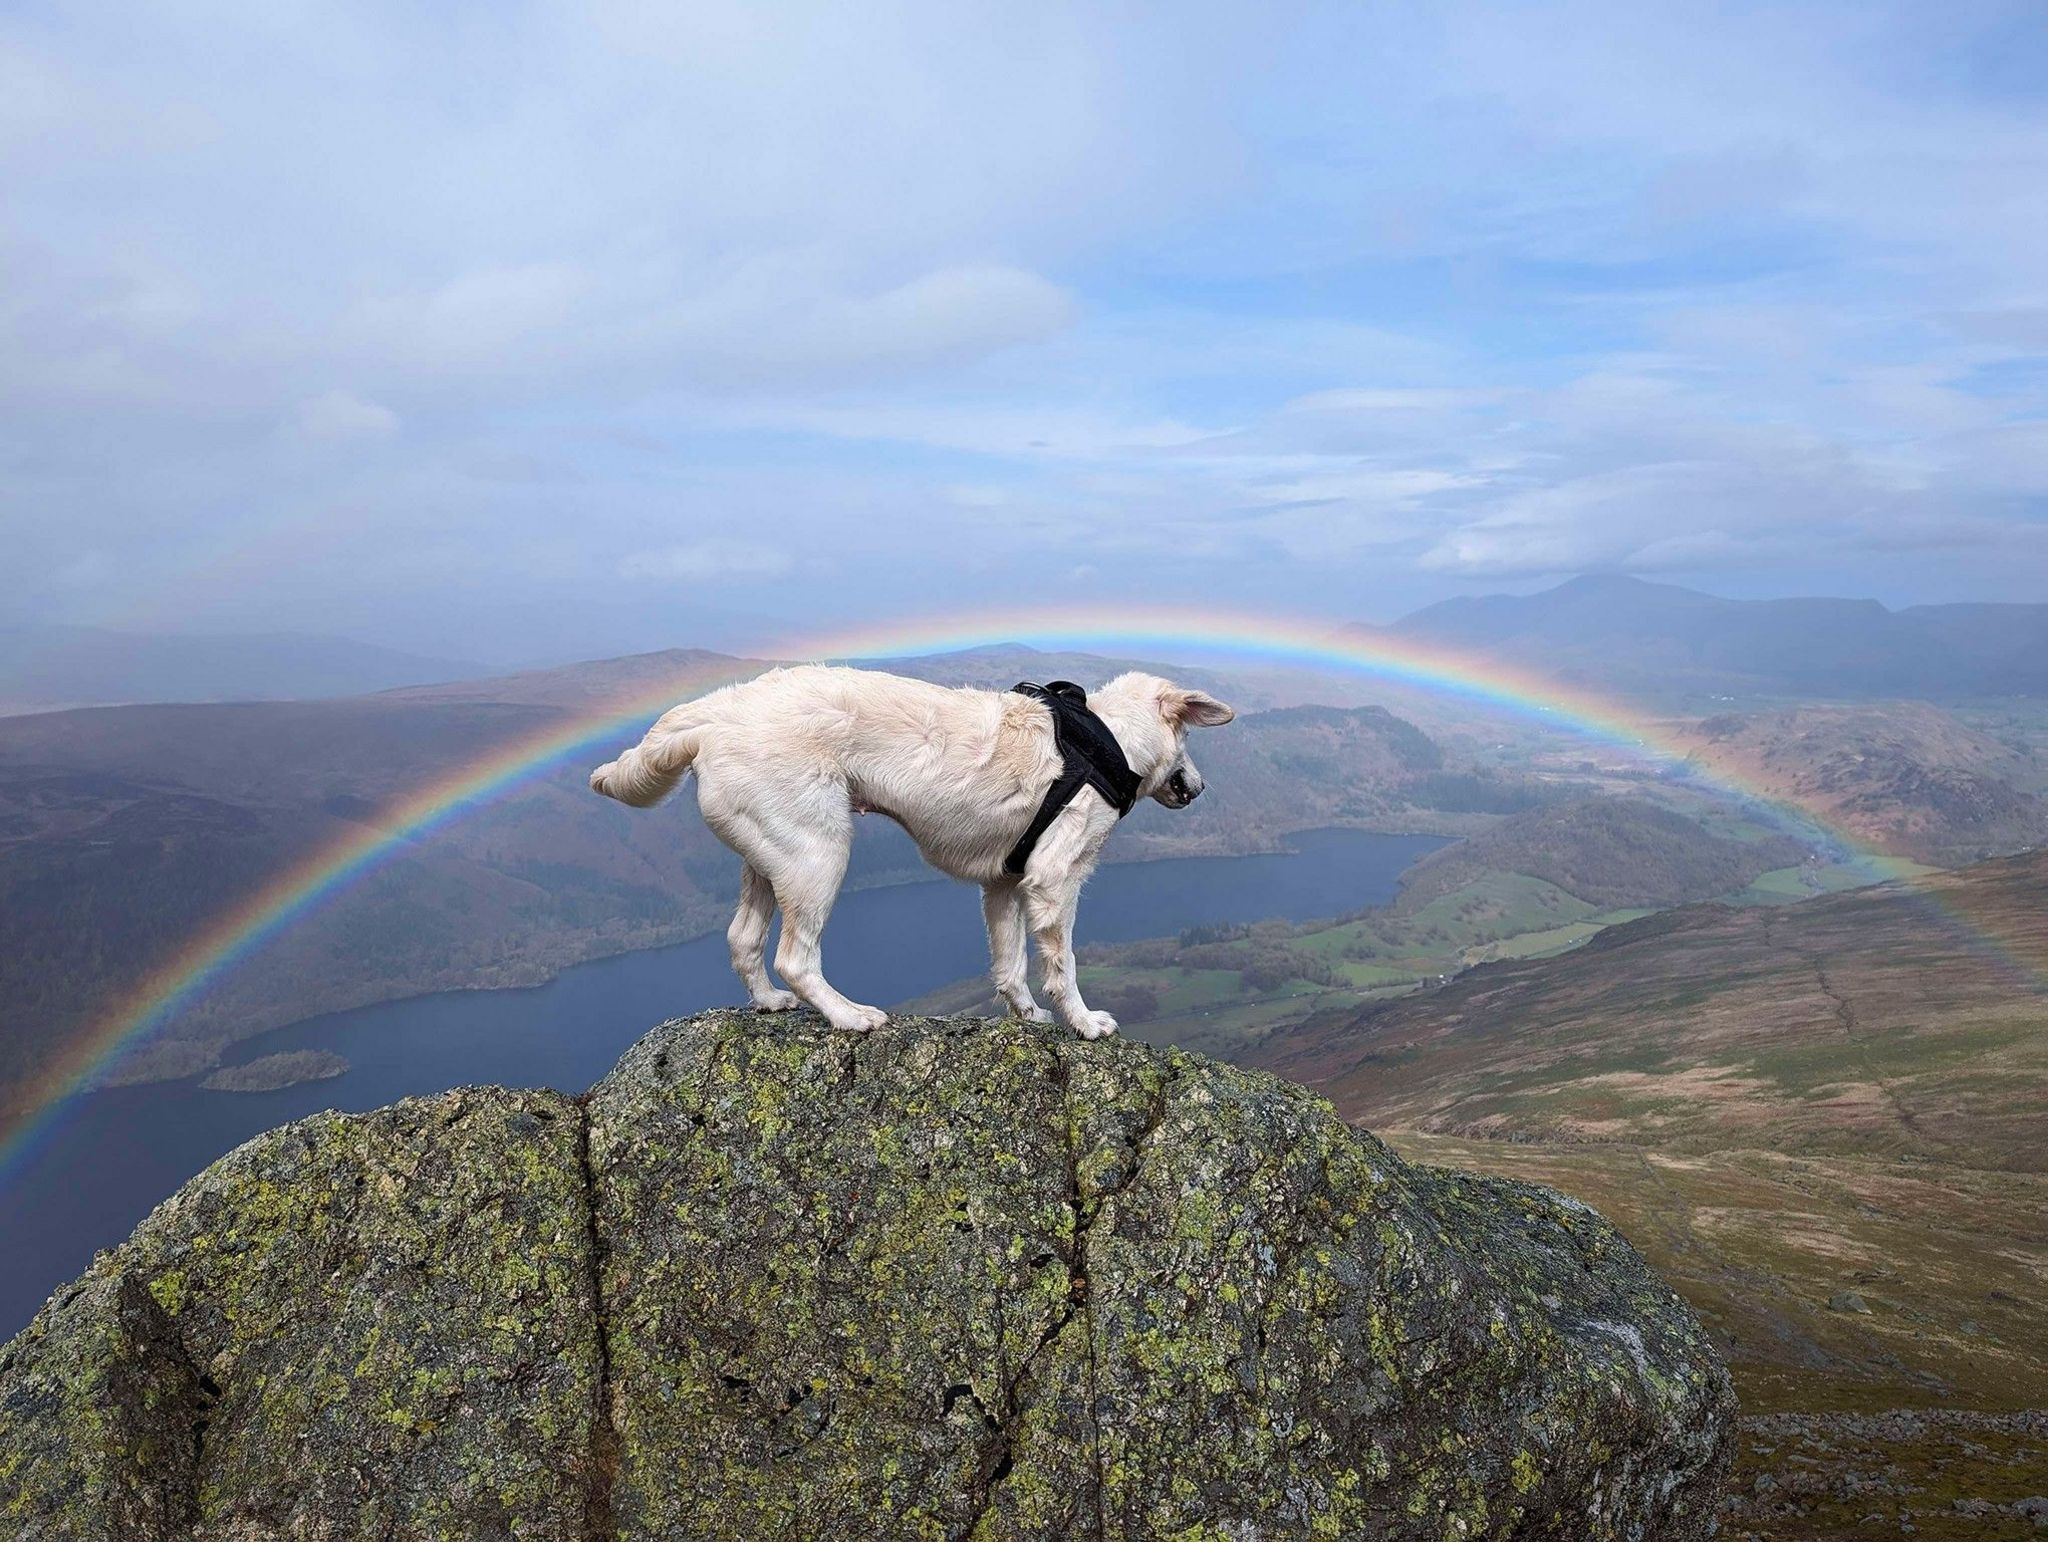 A dog stands on top of a rock, with a rainbow in the background